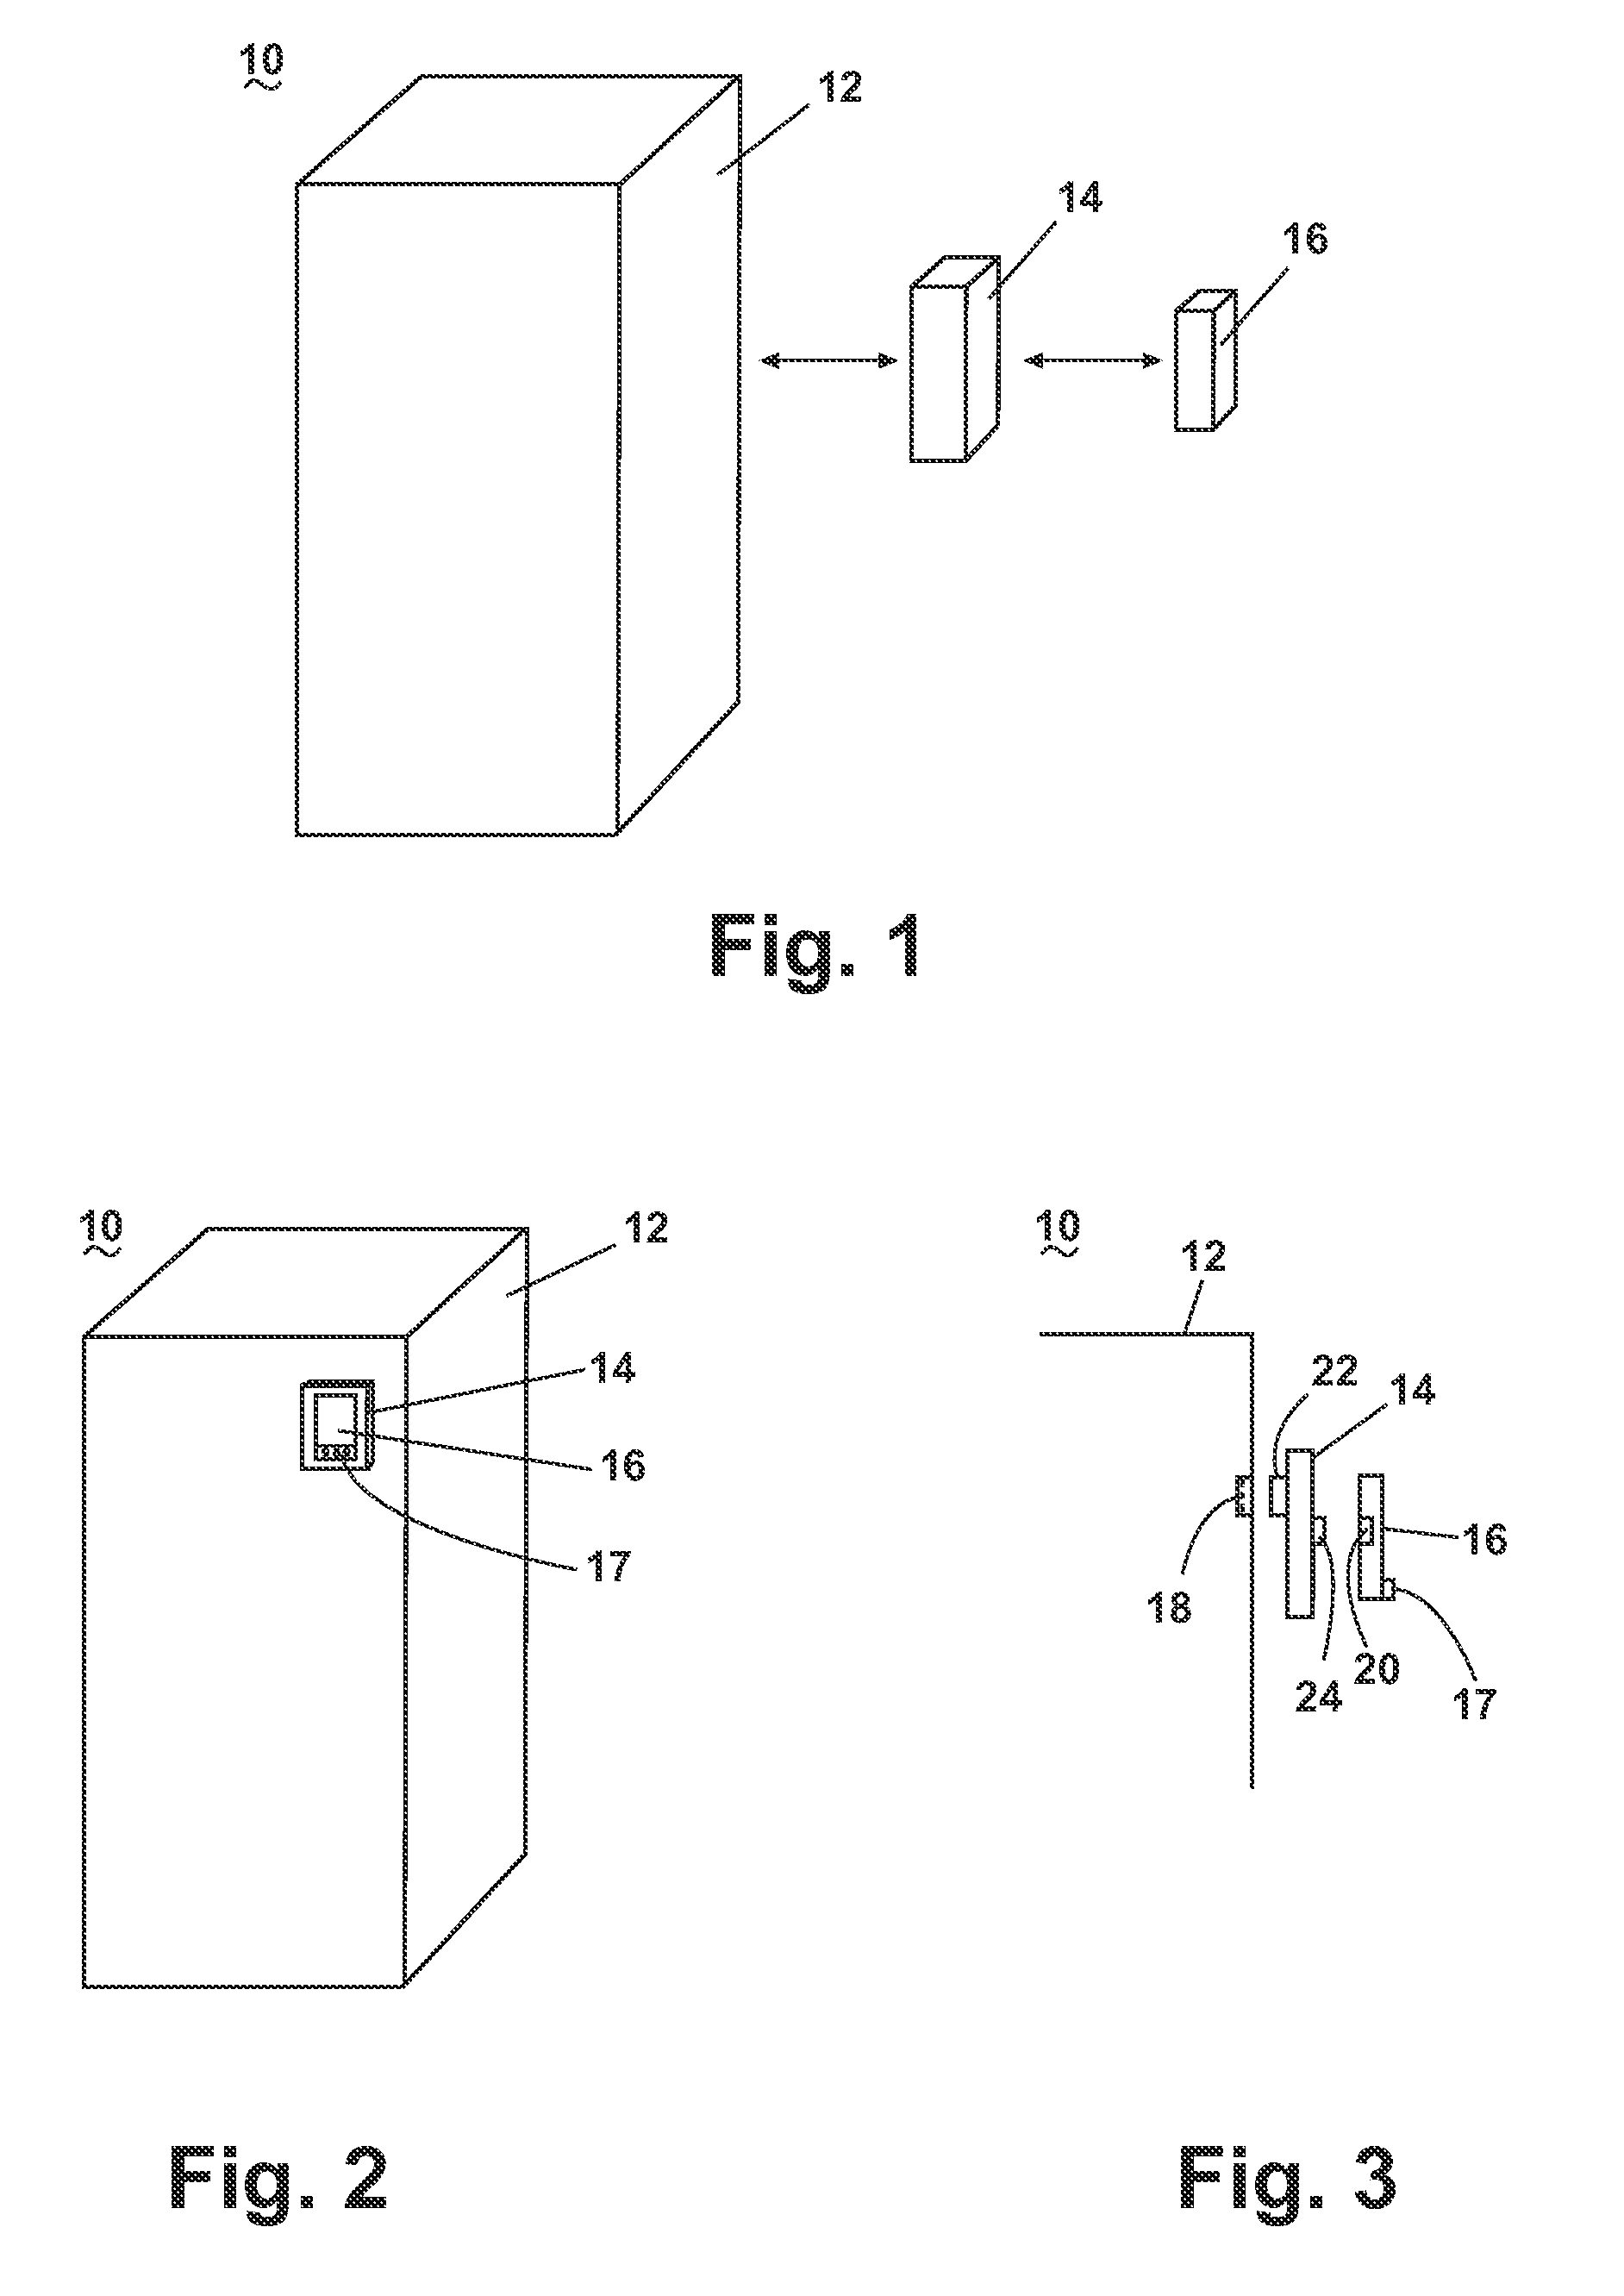 Adapter and consumer electronic device functional unit